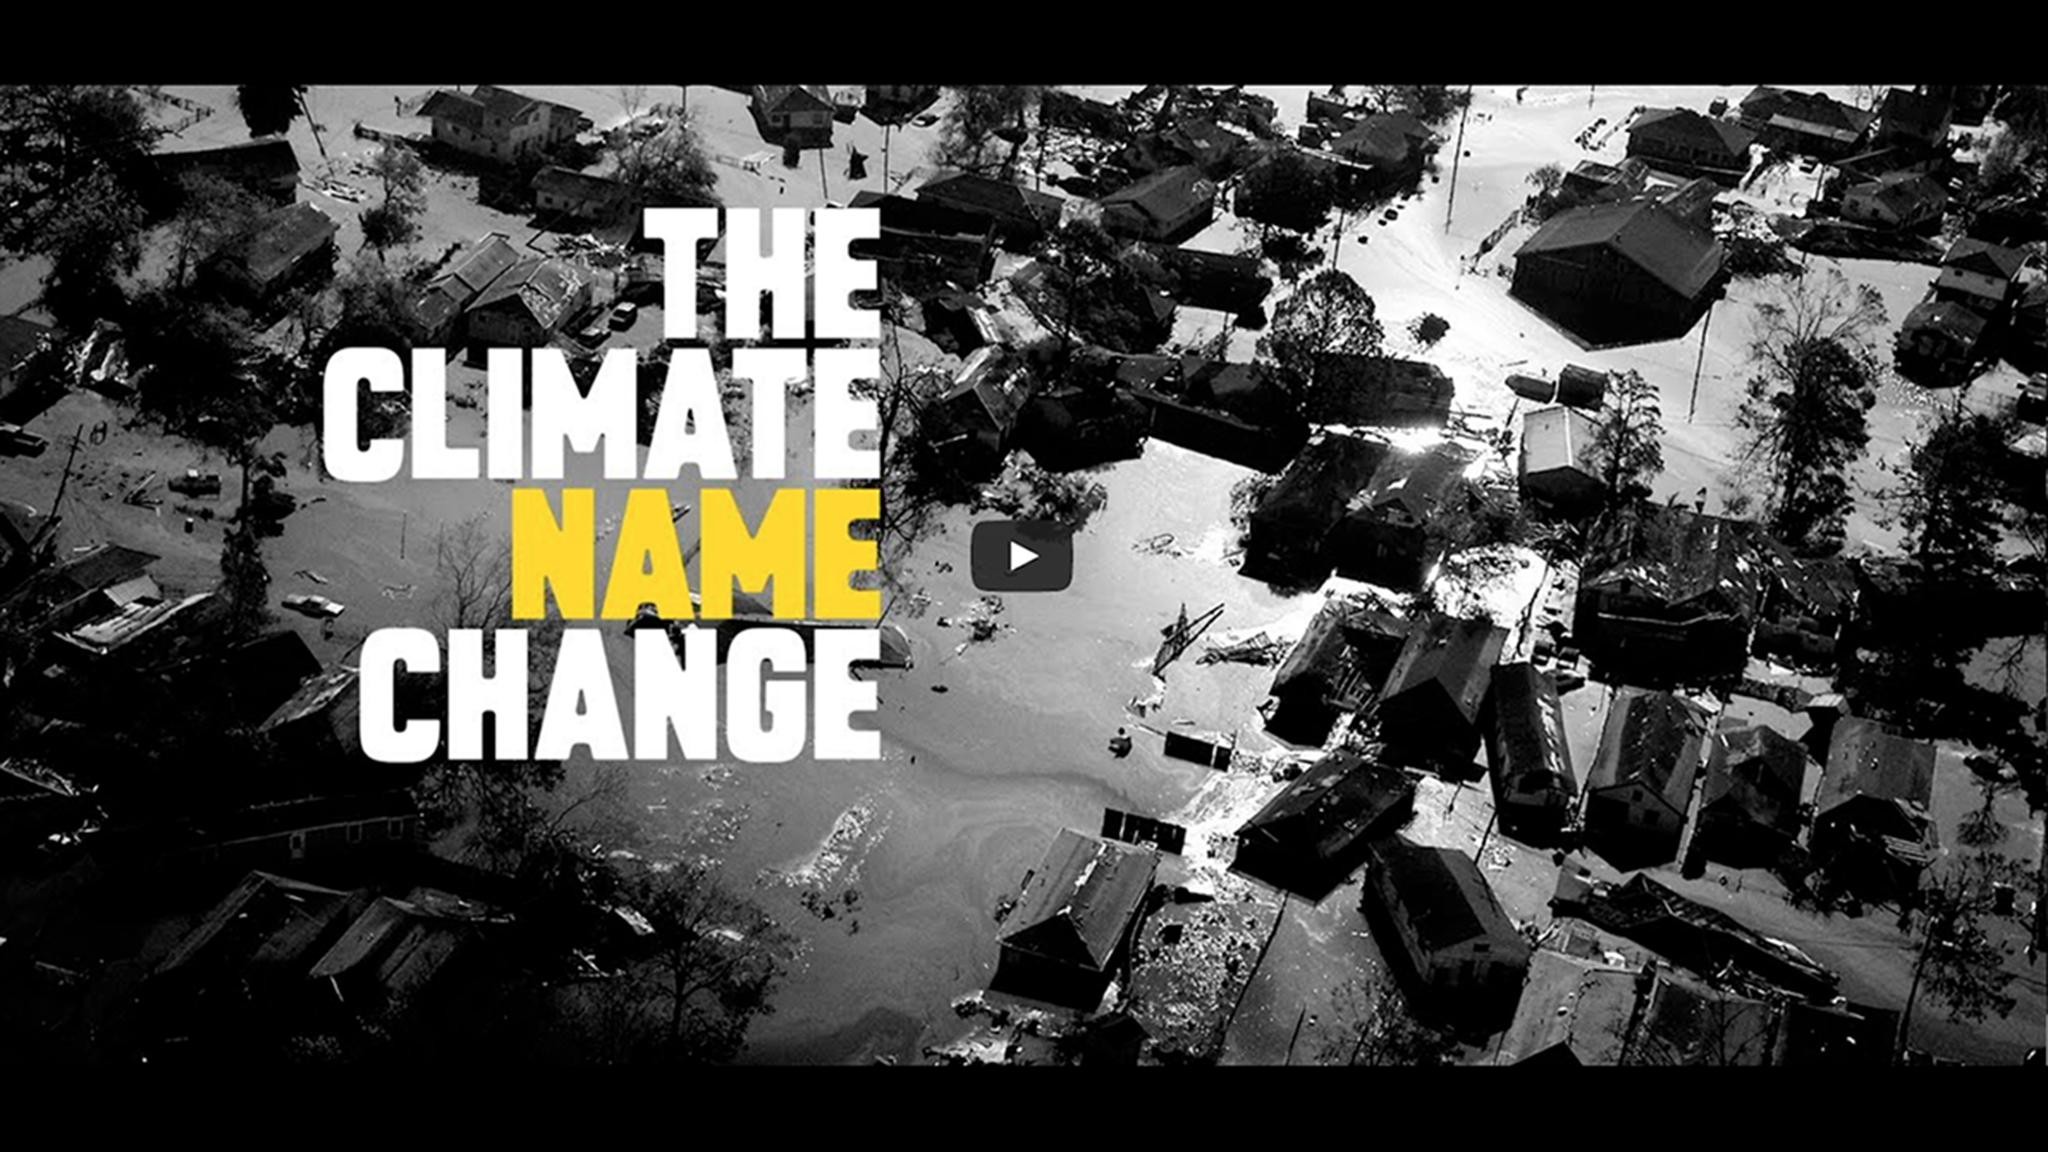 CLIMATE NAME CHANGE